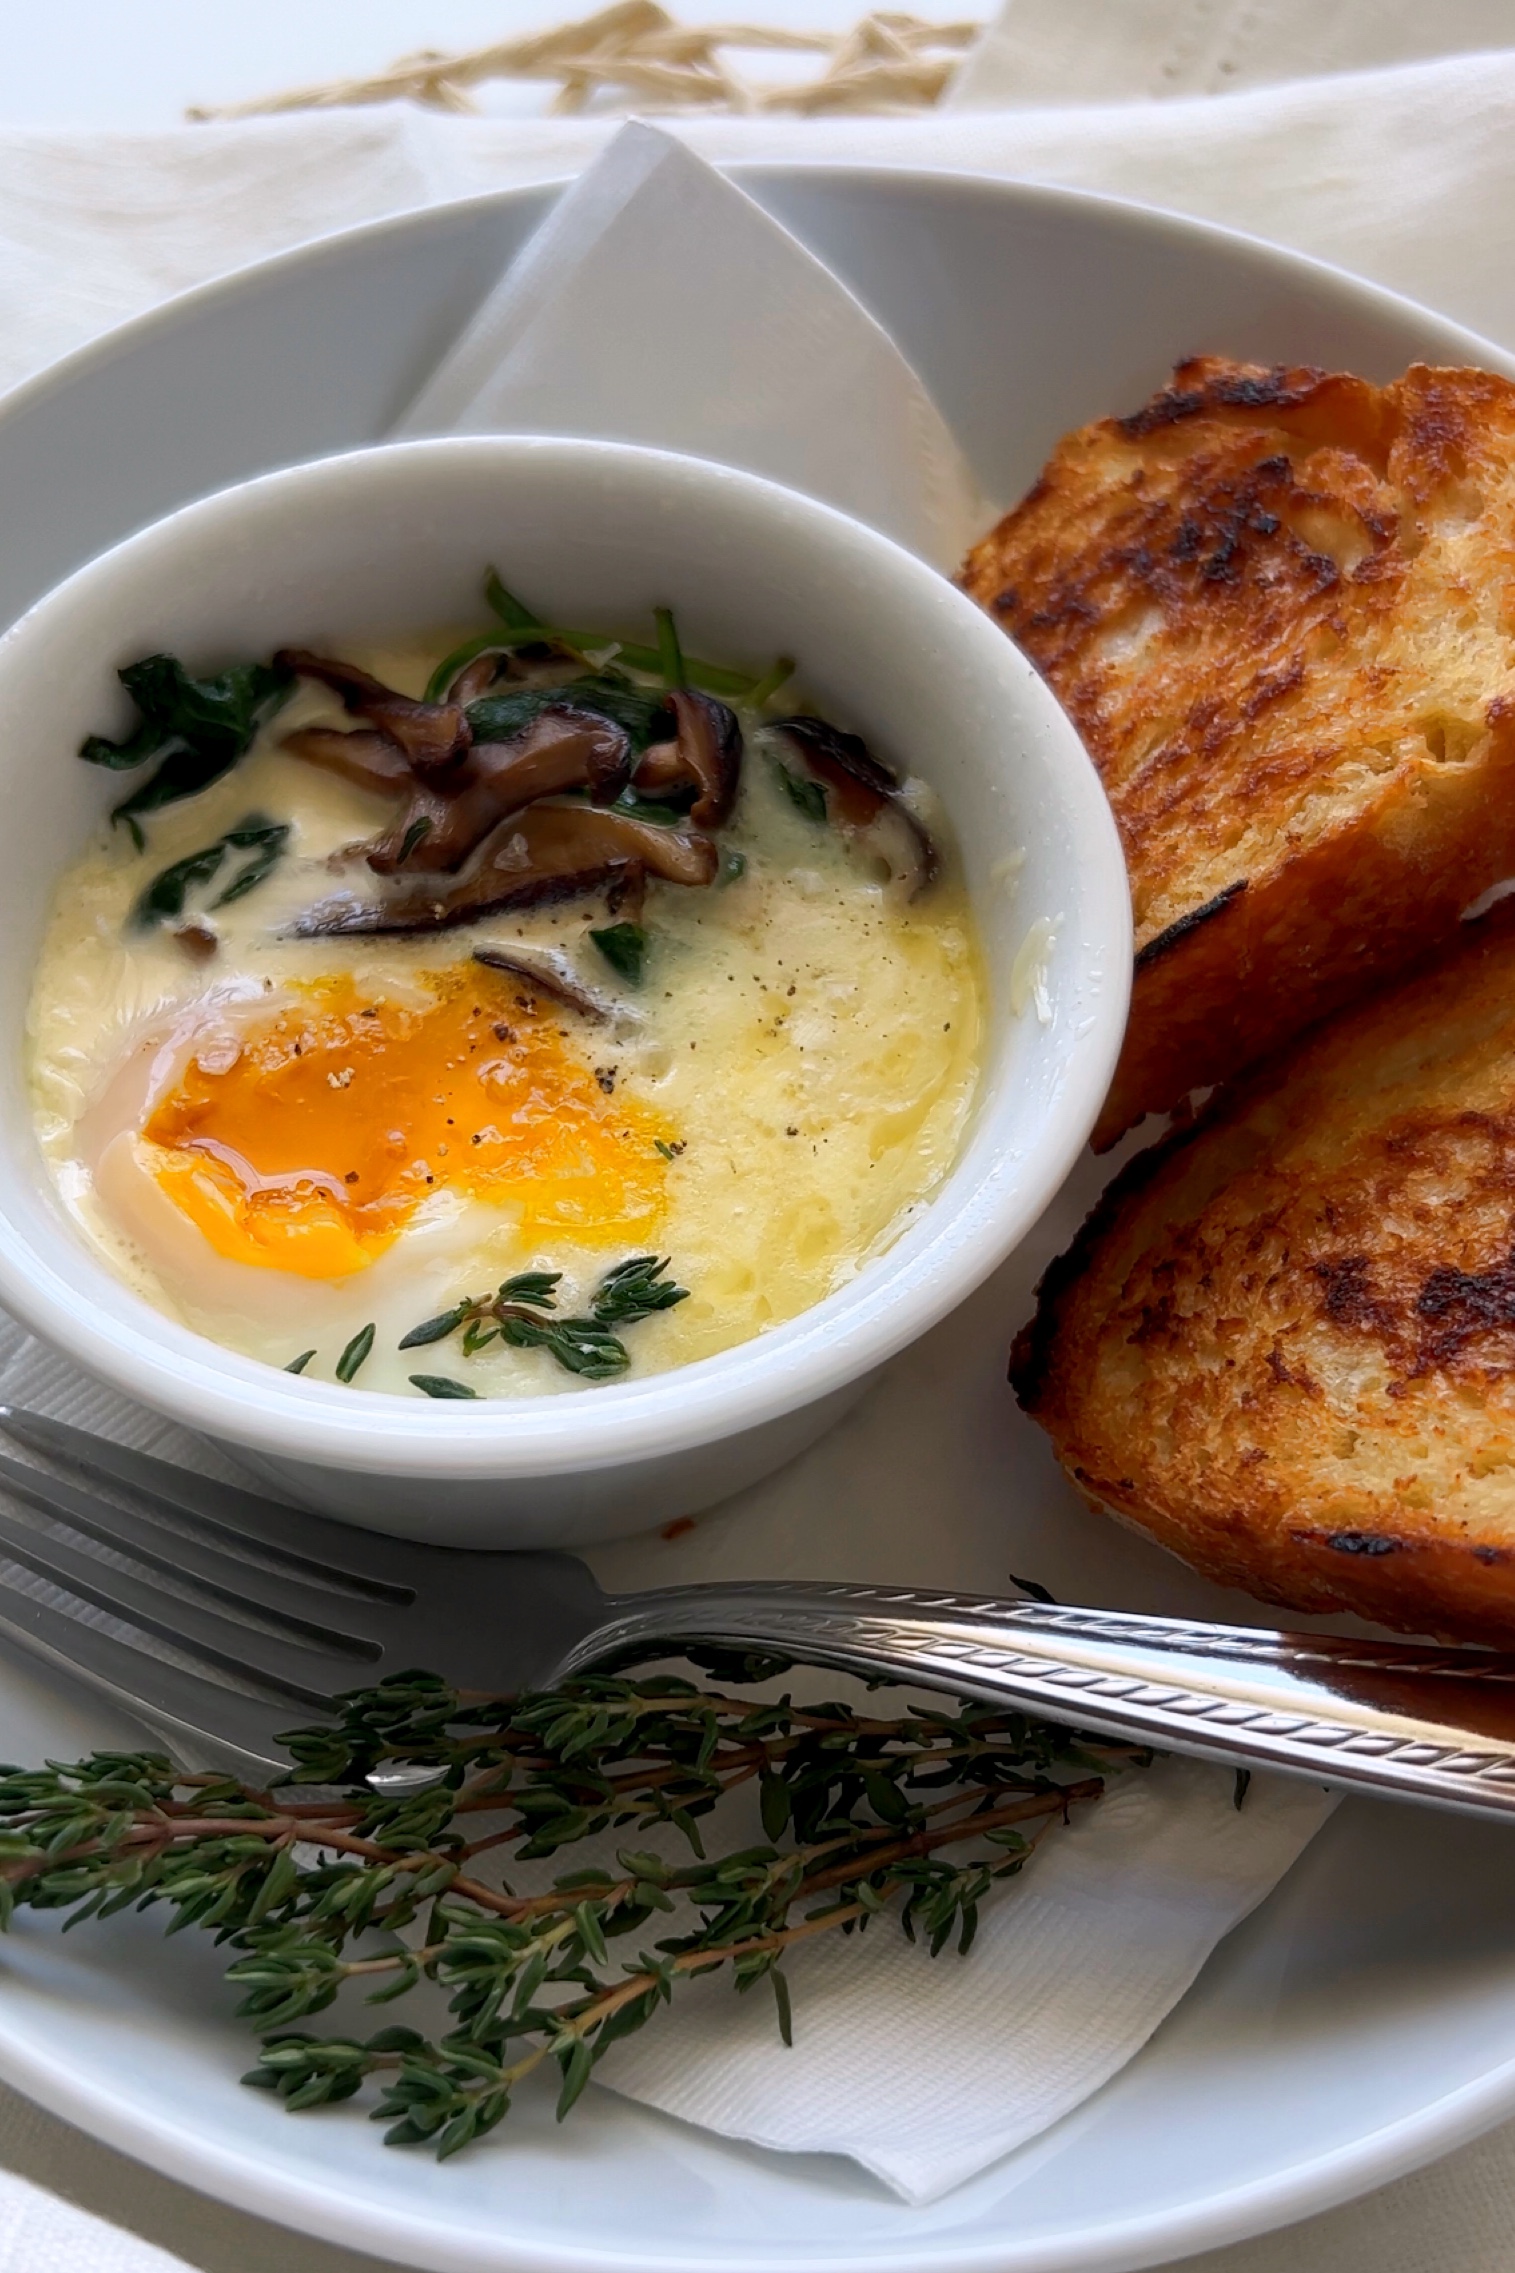 Eggs en Cocotte or baked eggs sit in a white bowl, on top of a white plate featuring a crusty bread and a fork.